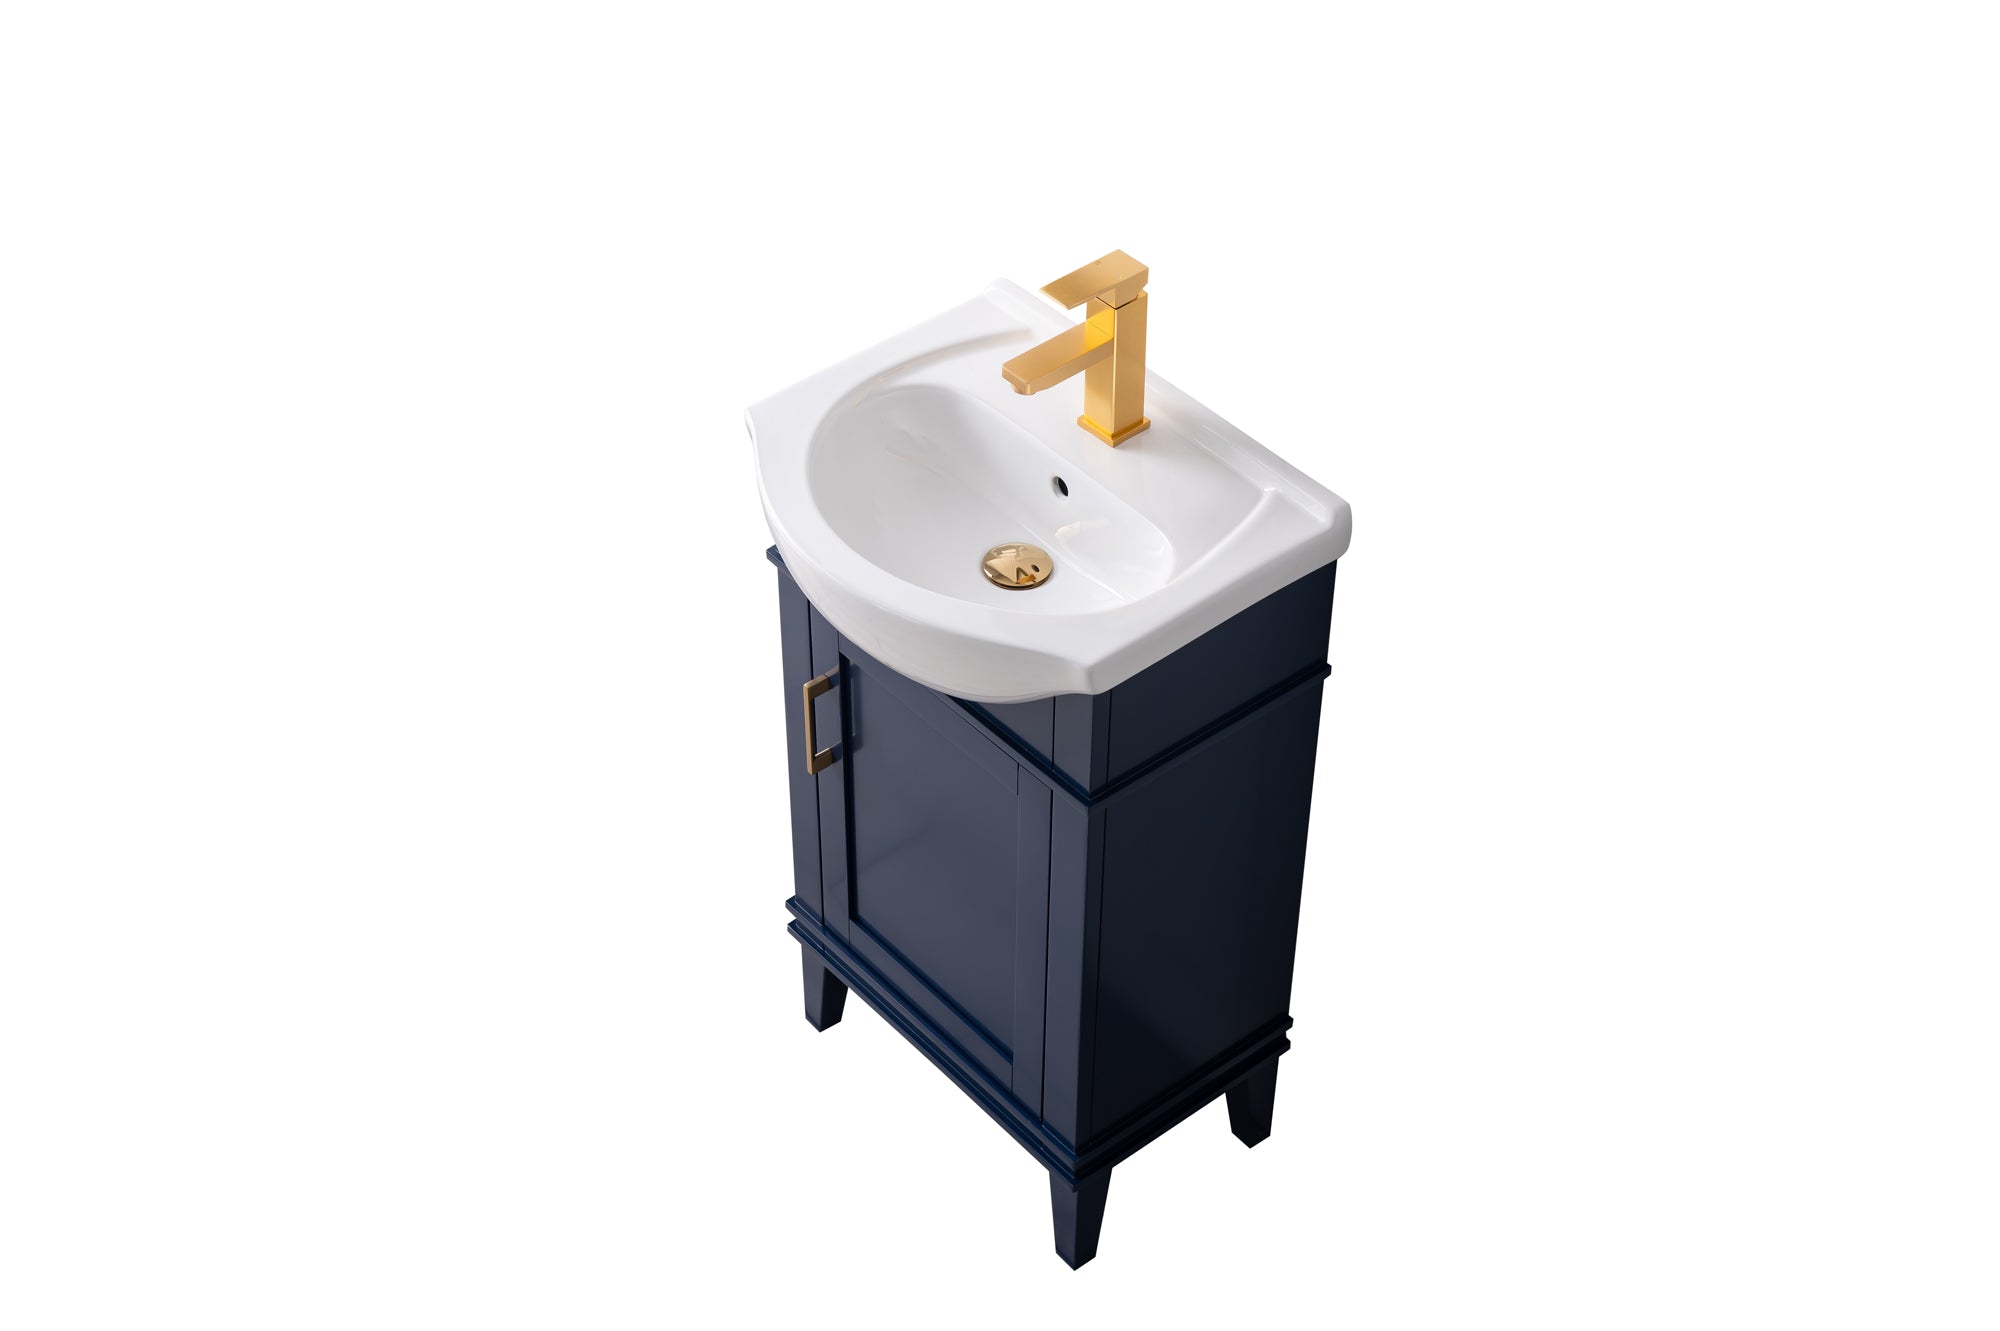 Easyfashion Modern Over-the-Toilet Storage Cabinet for Bathroom, Navy Blue